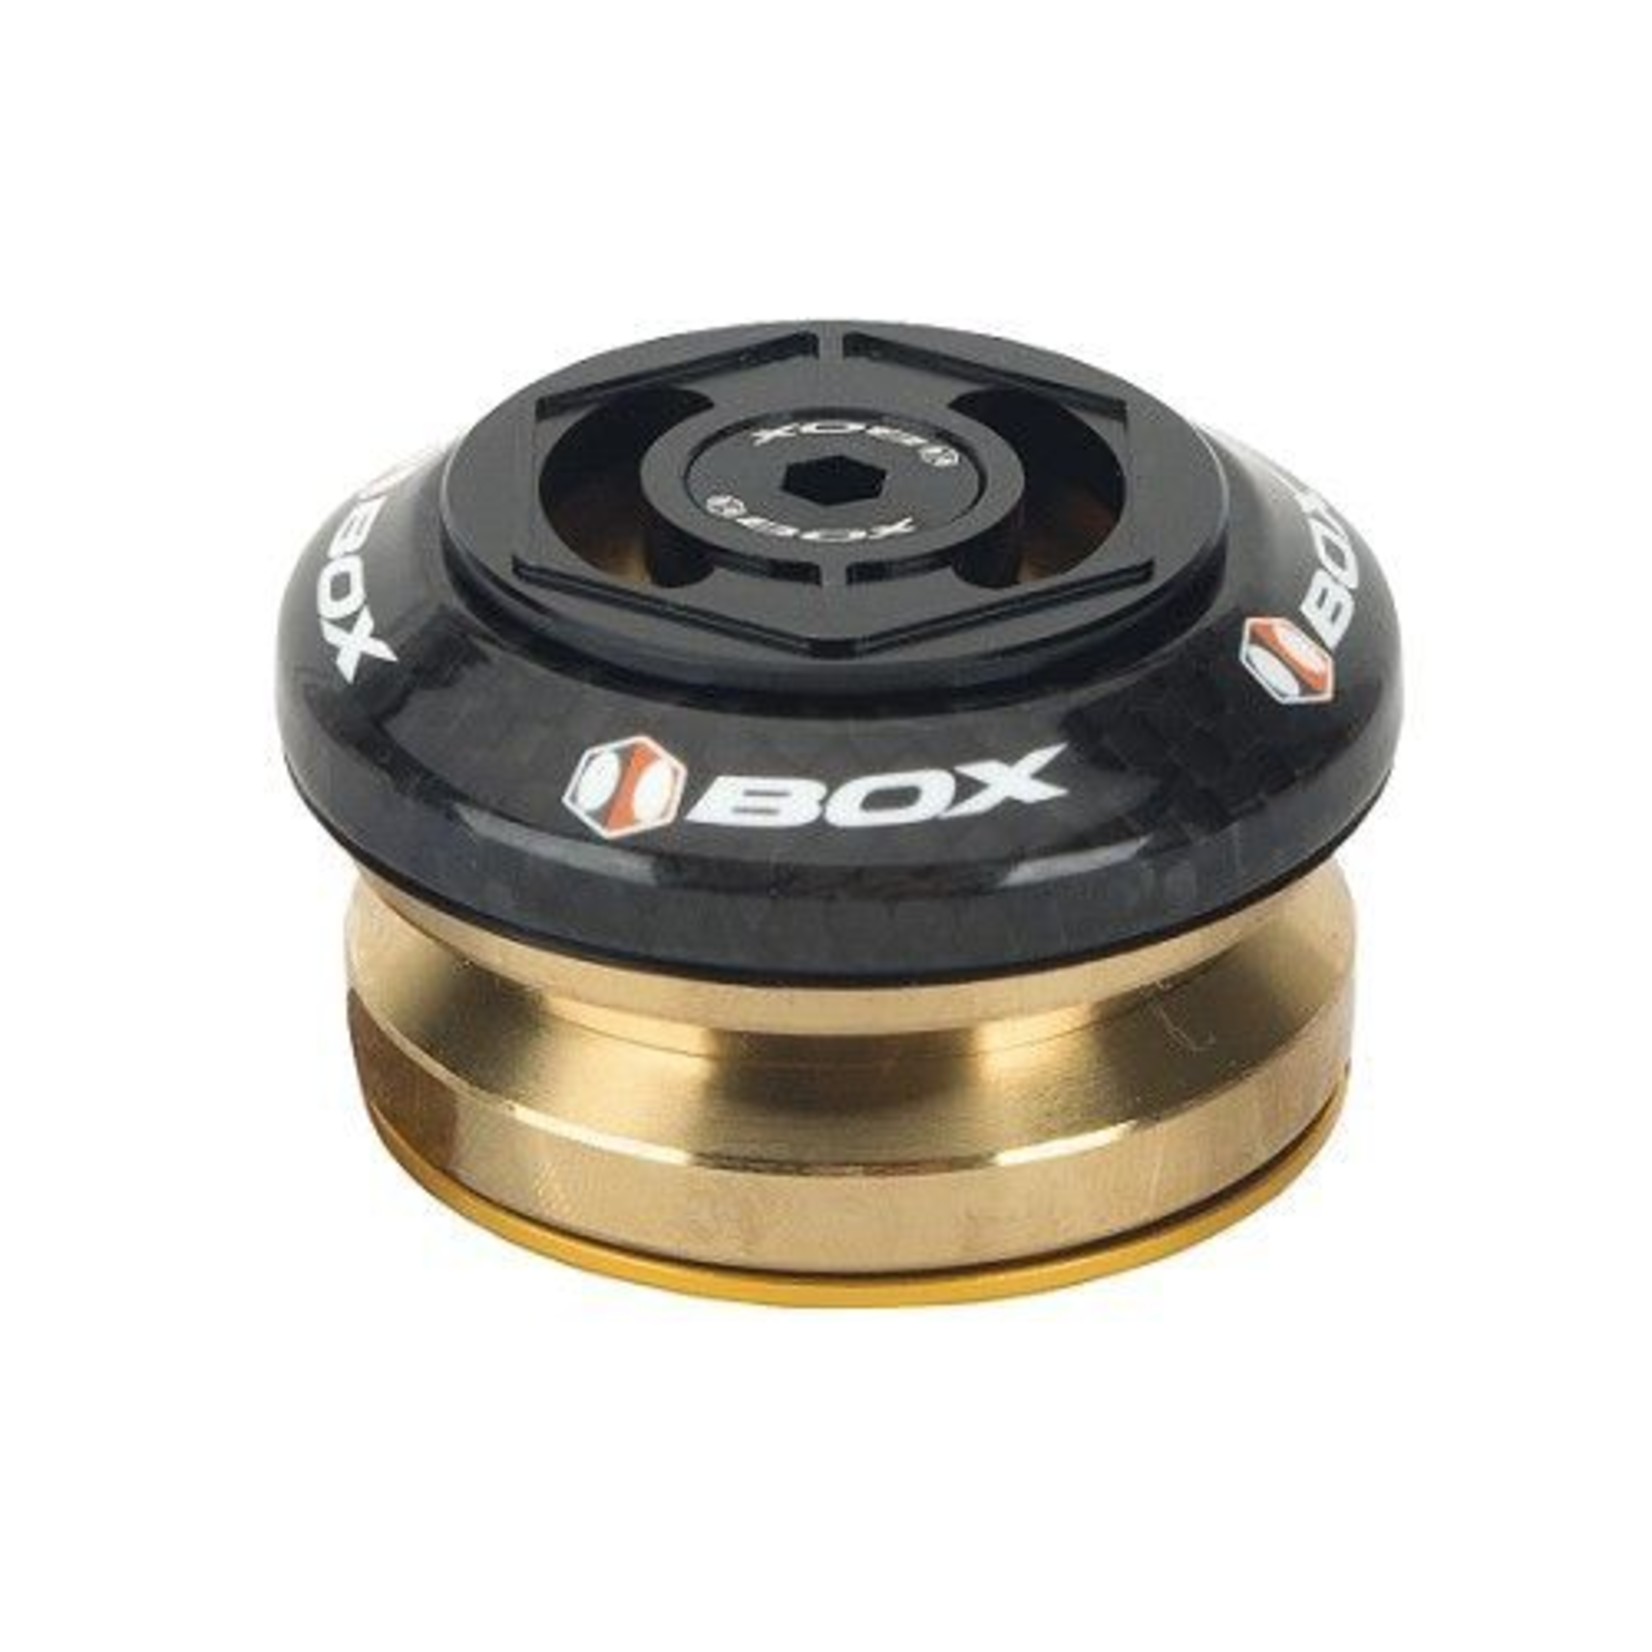 Box Components Box Glide Headset Integrated 1 1/8" Carbon Black